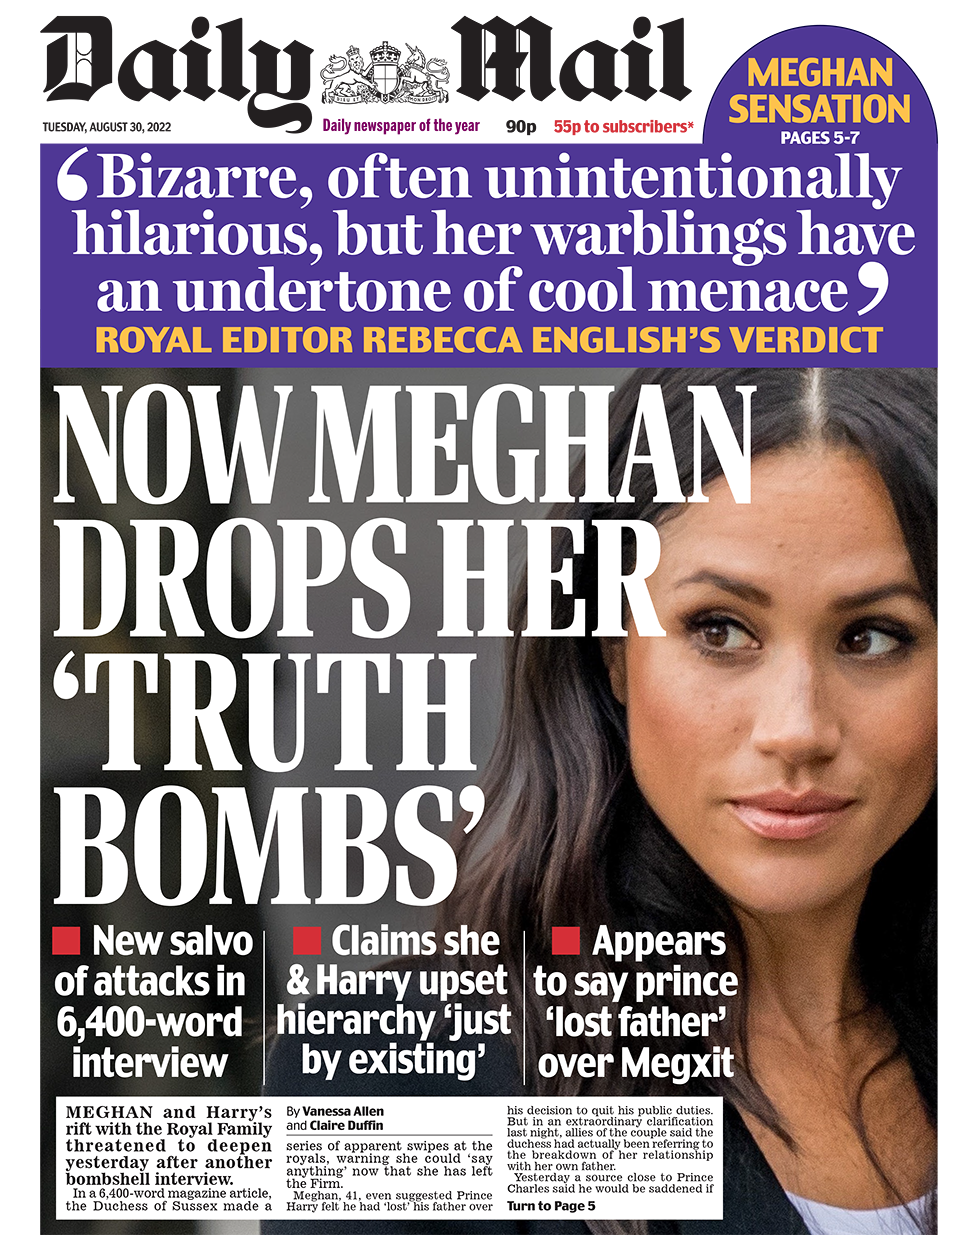 The headline in the Daily Mail reads 'Now Meghan drops her truth bombs'